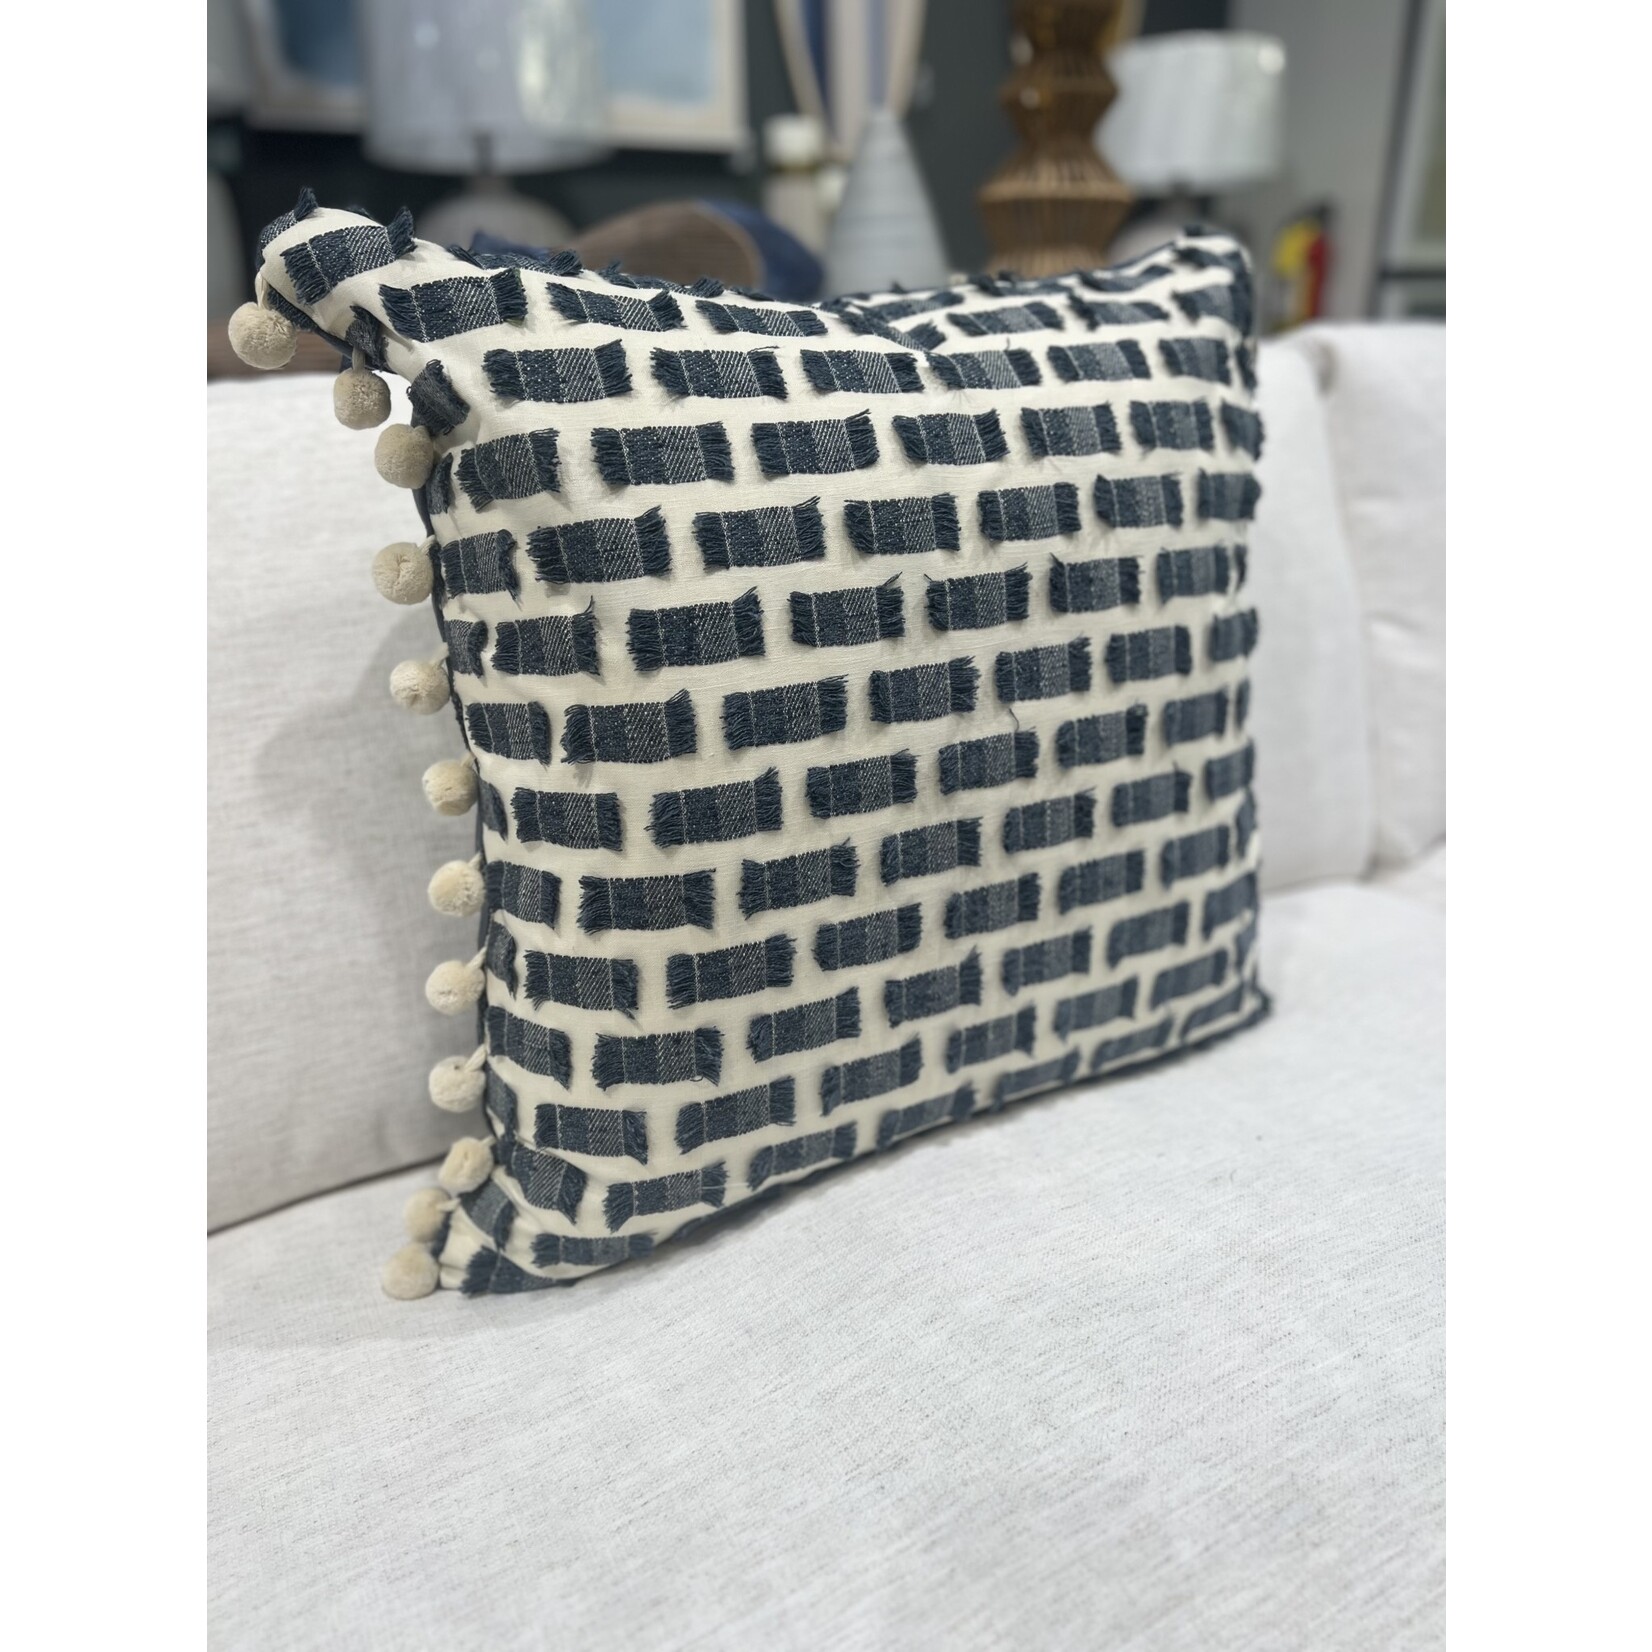 Outside The Box 24x24 Wendy Jane All Fringed Up Denim W/ Pom Poms Feather Down Accent Pillow